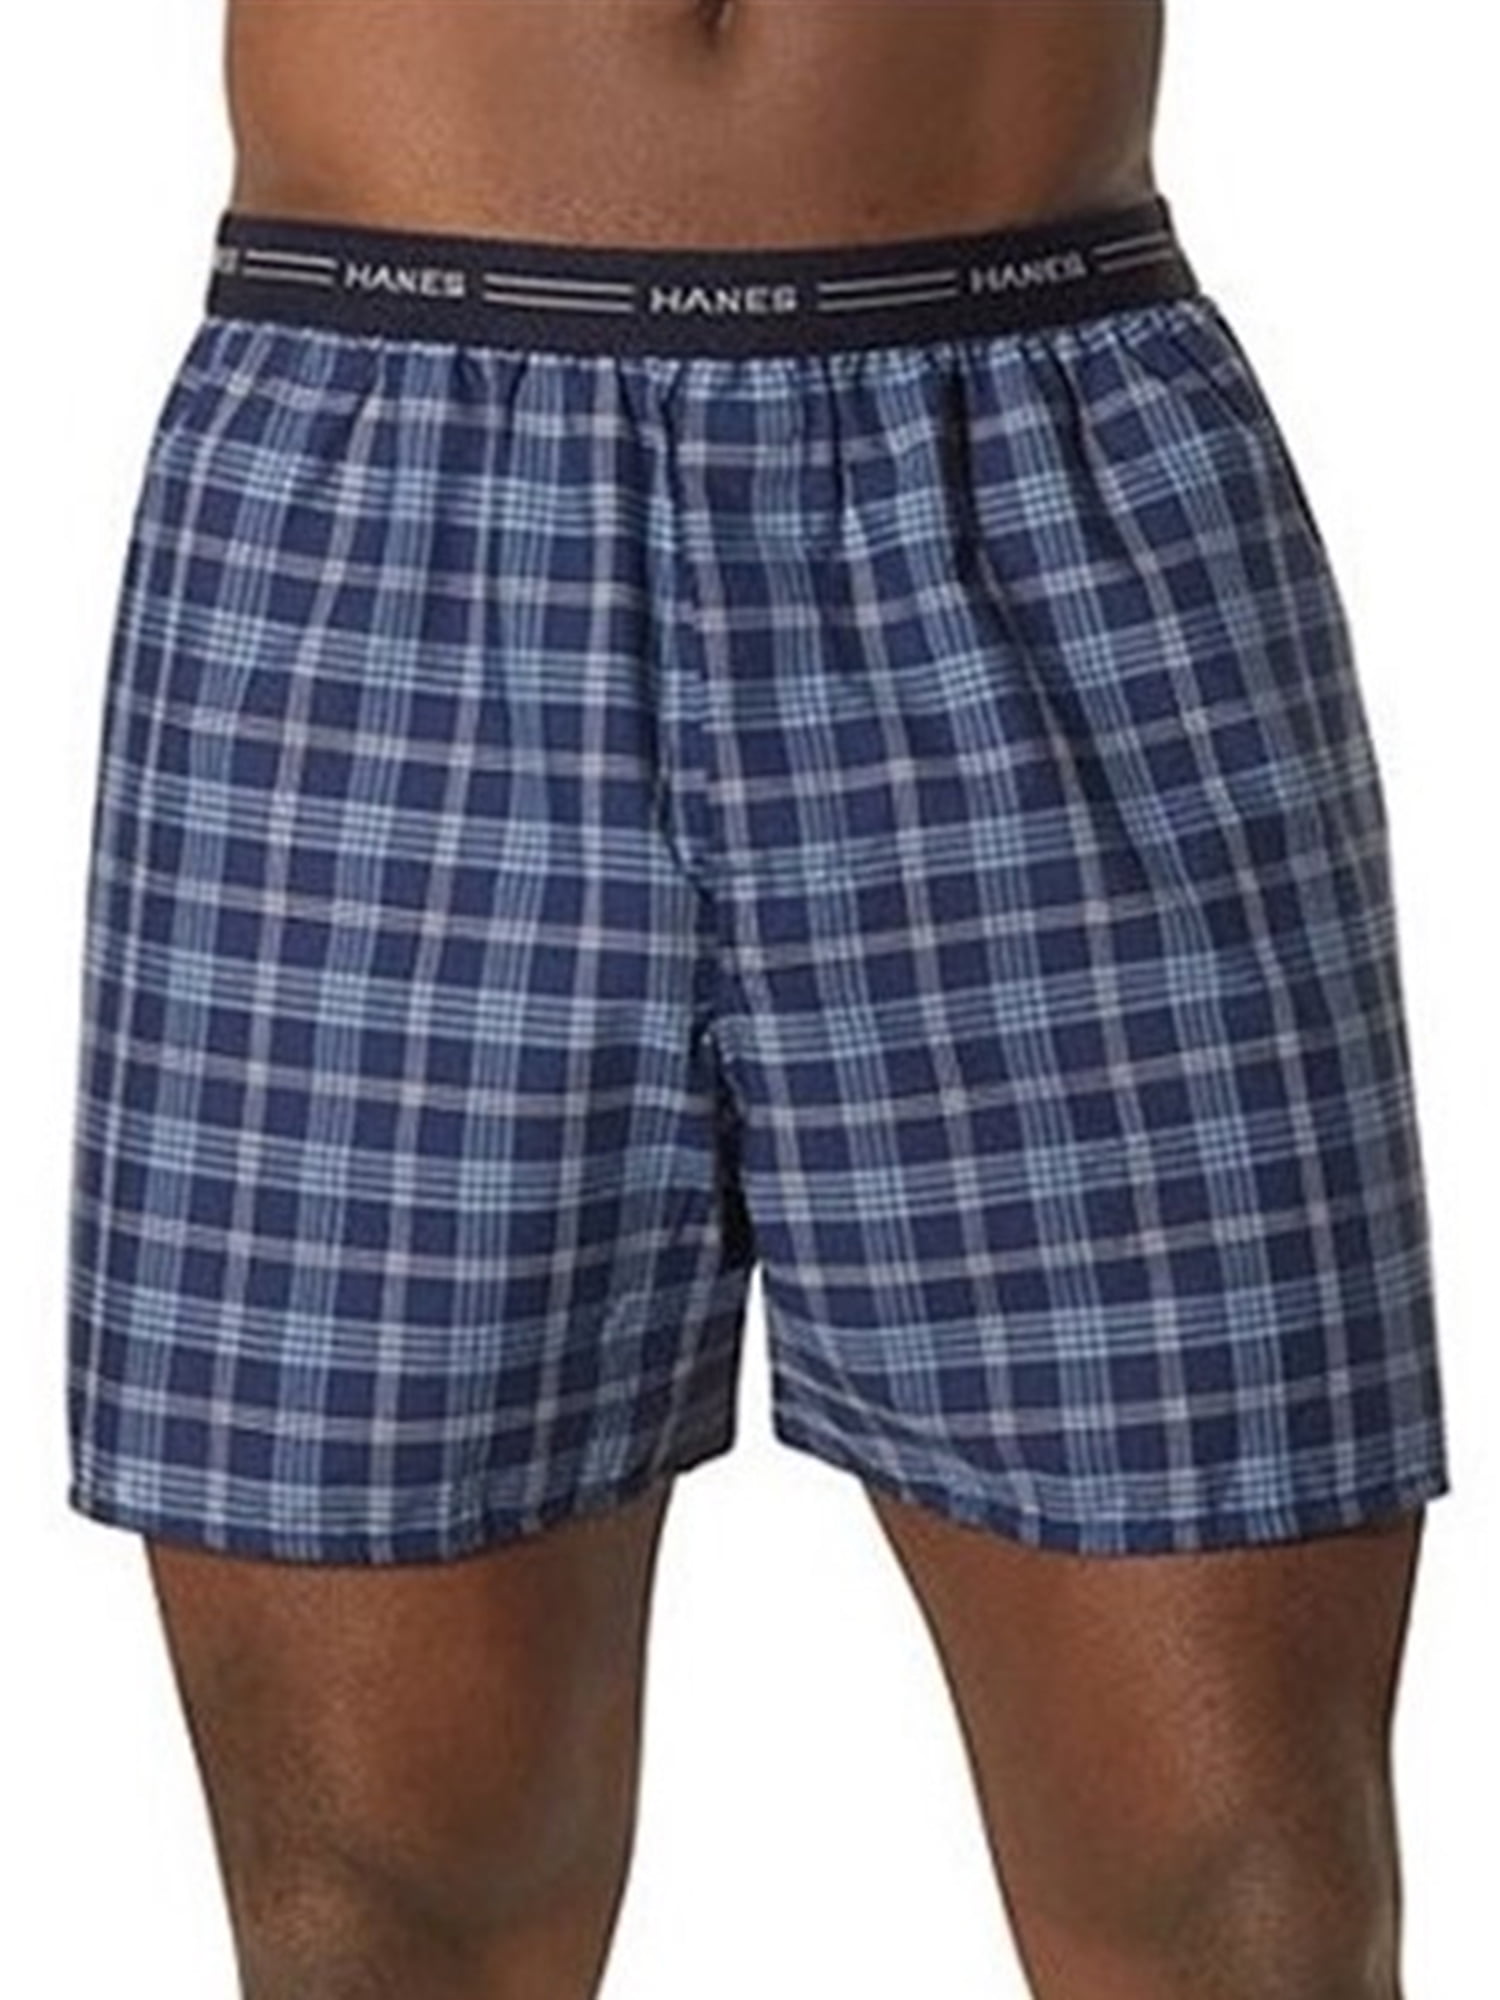 Hanes Mens 5-Pack Boxer with Exposed Waistband Medium, Plaids / Prints Exposed Waistband 